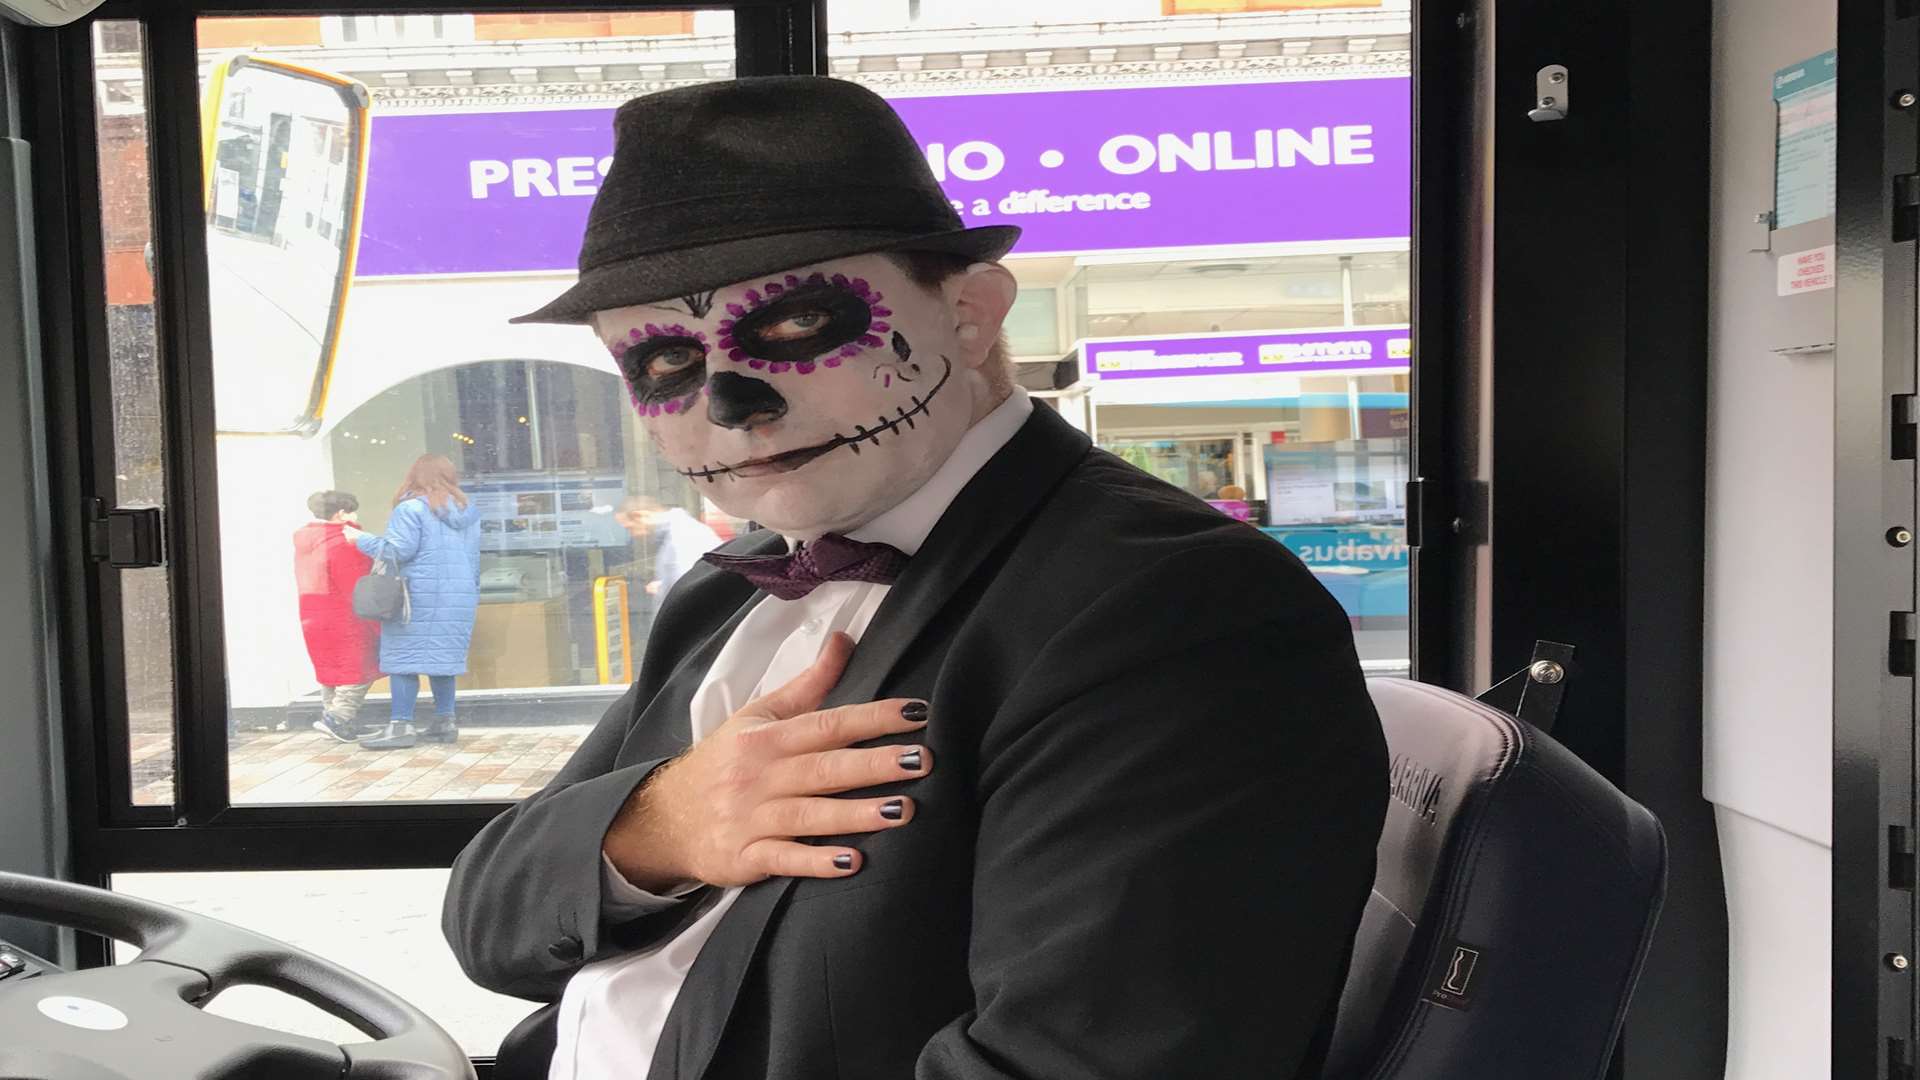 This bus driver has dressed up for Halloween.